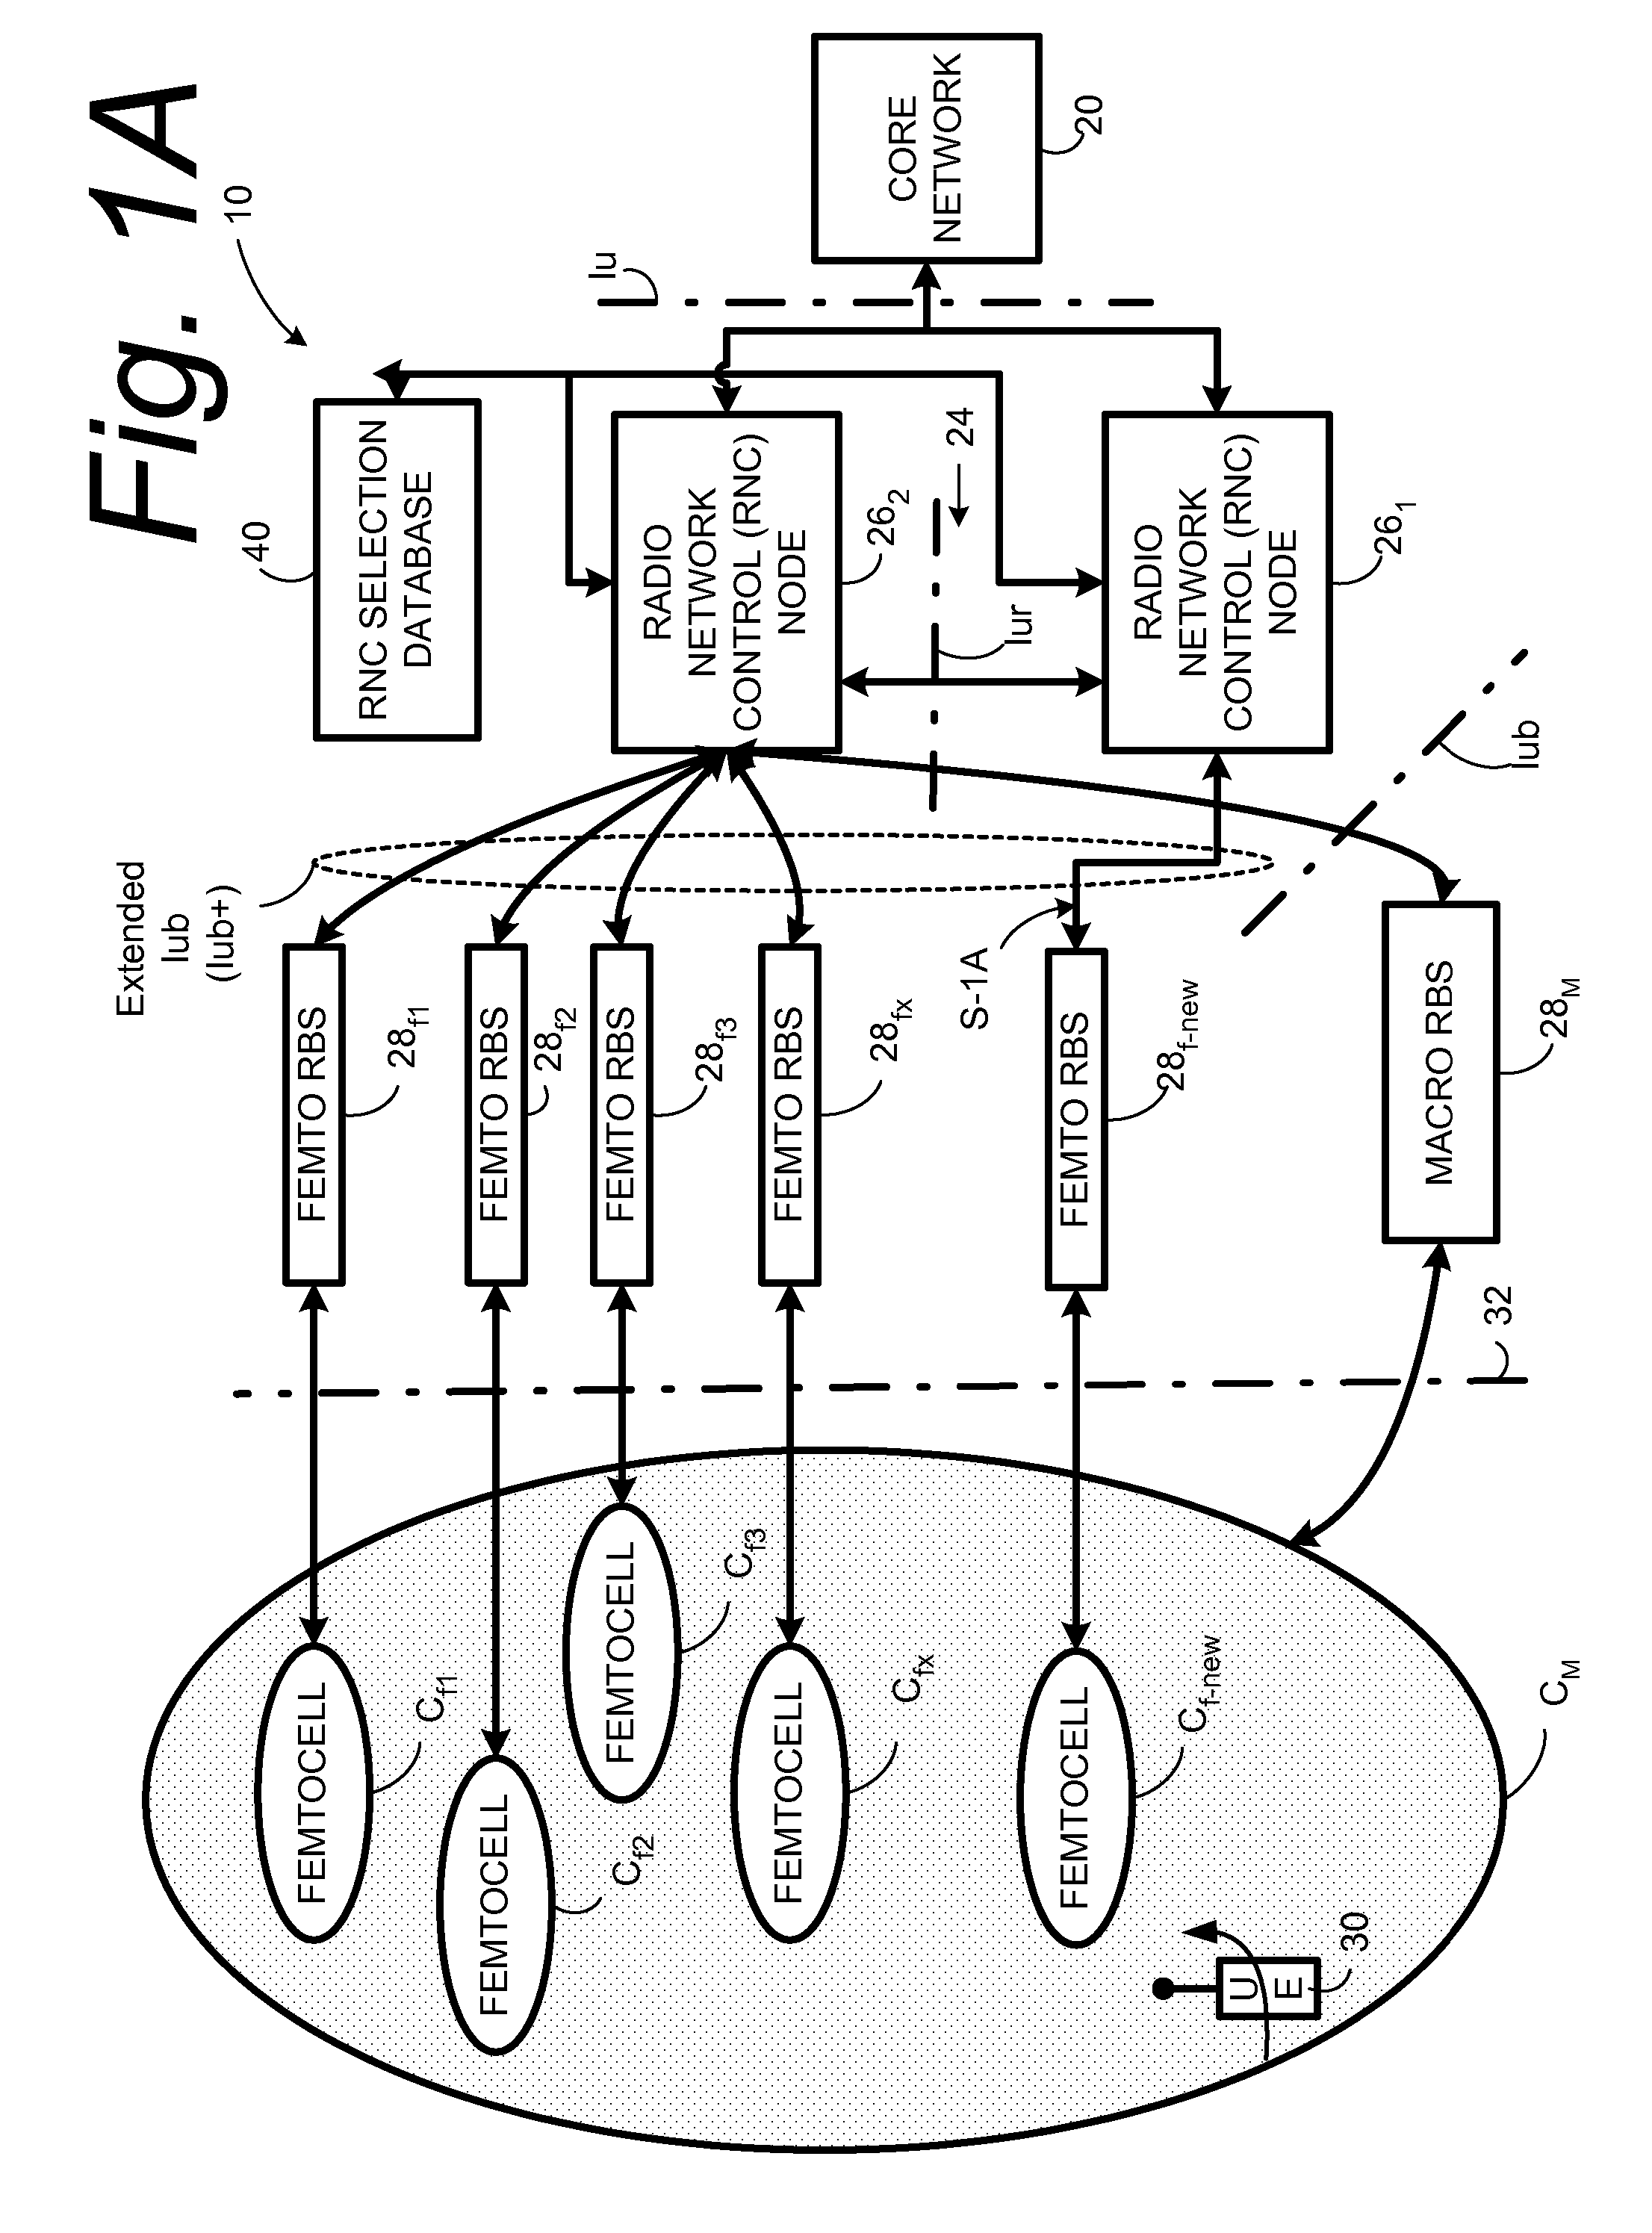 Redirection of ip-connected radio base station to correct control node